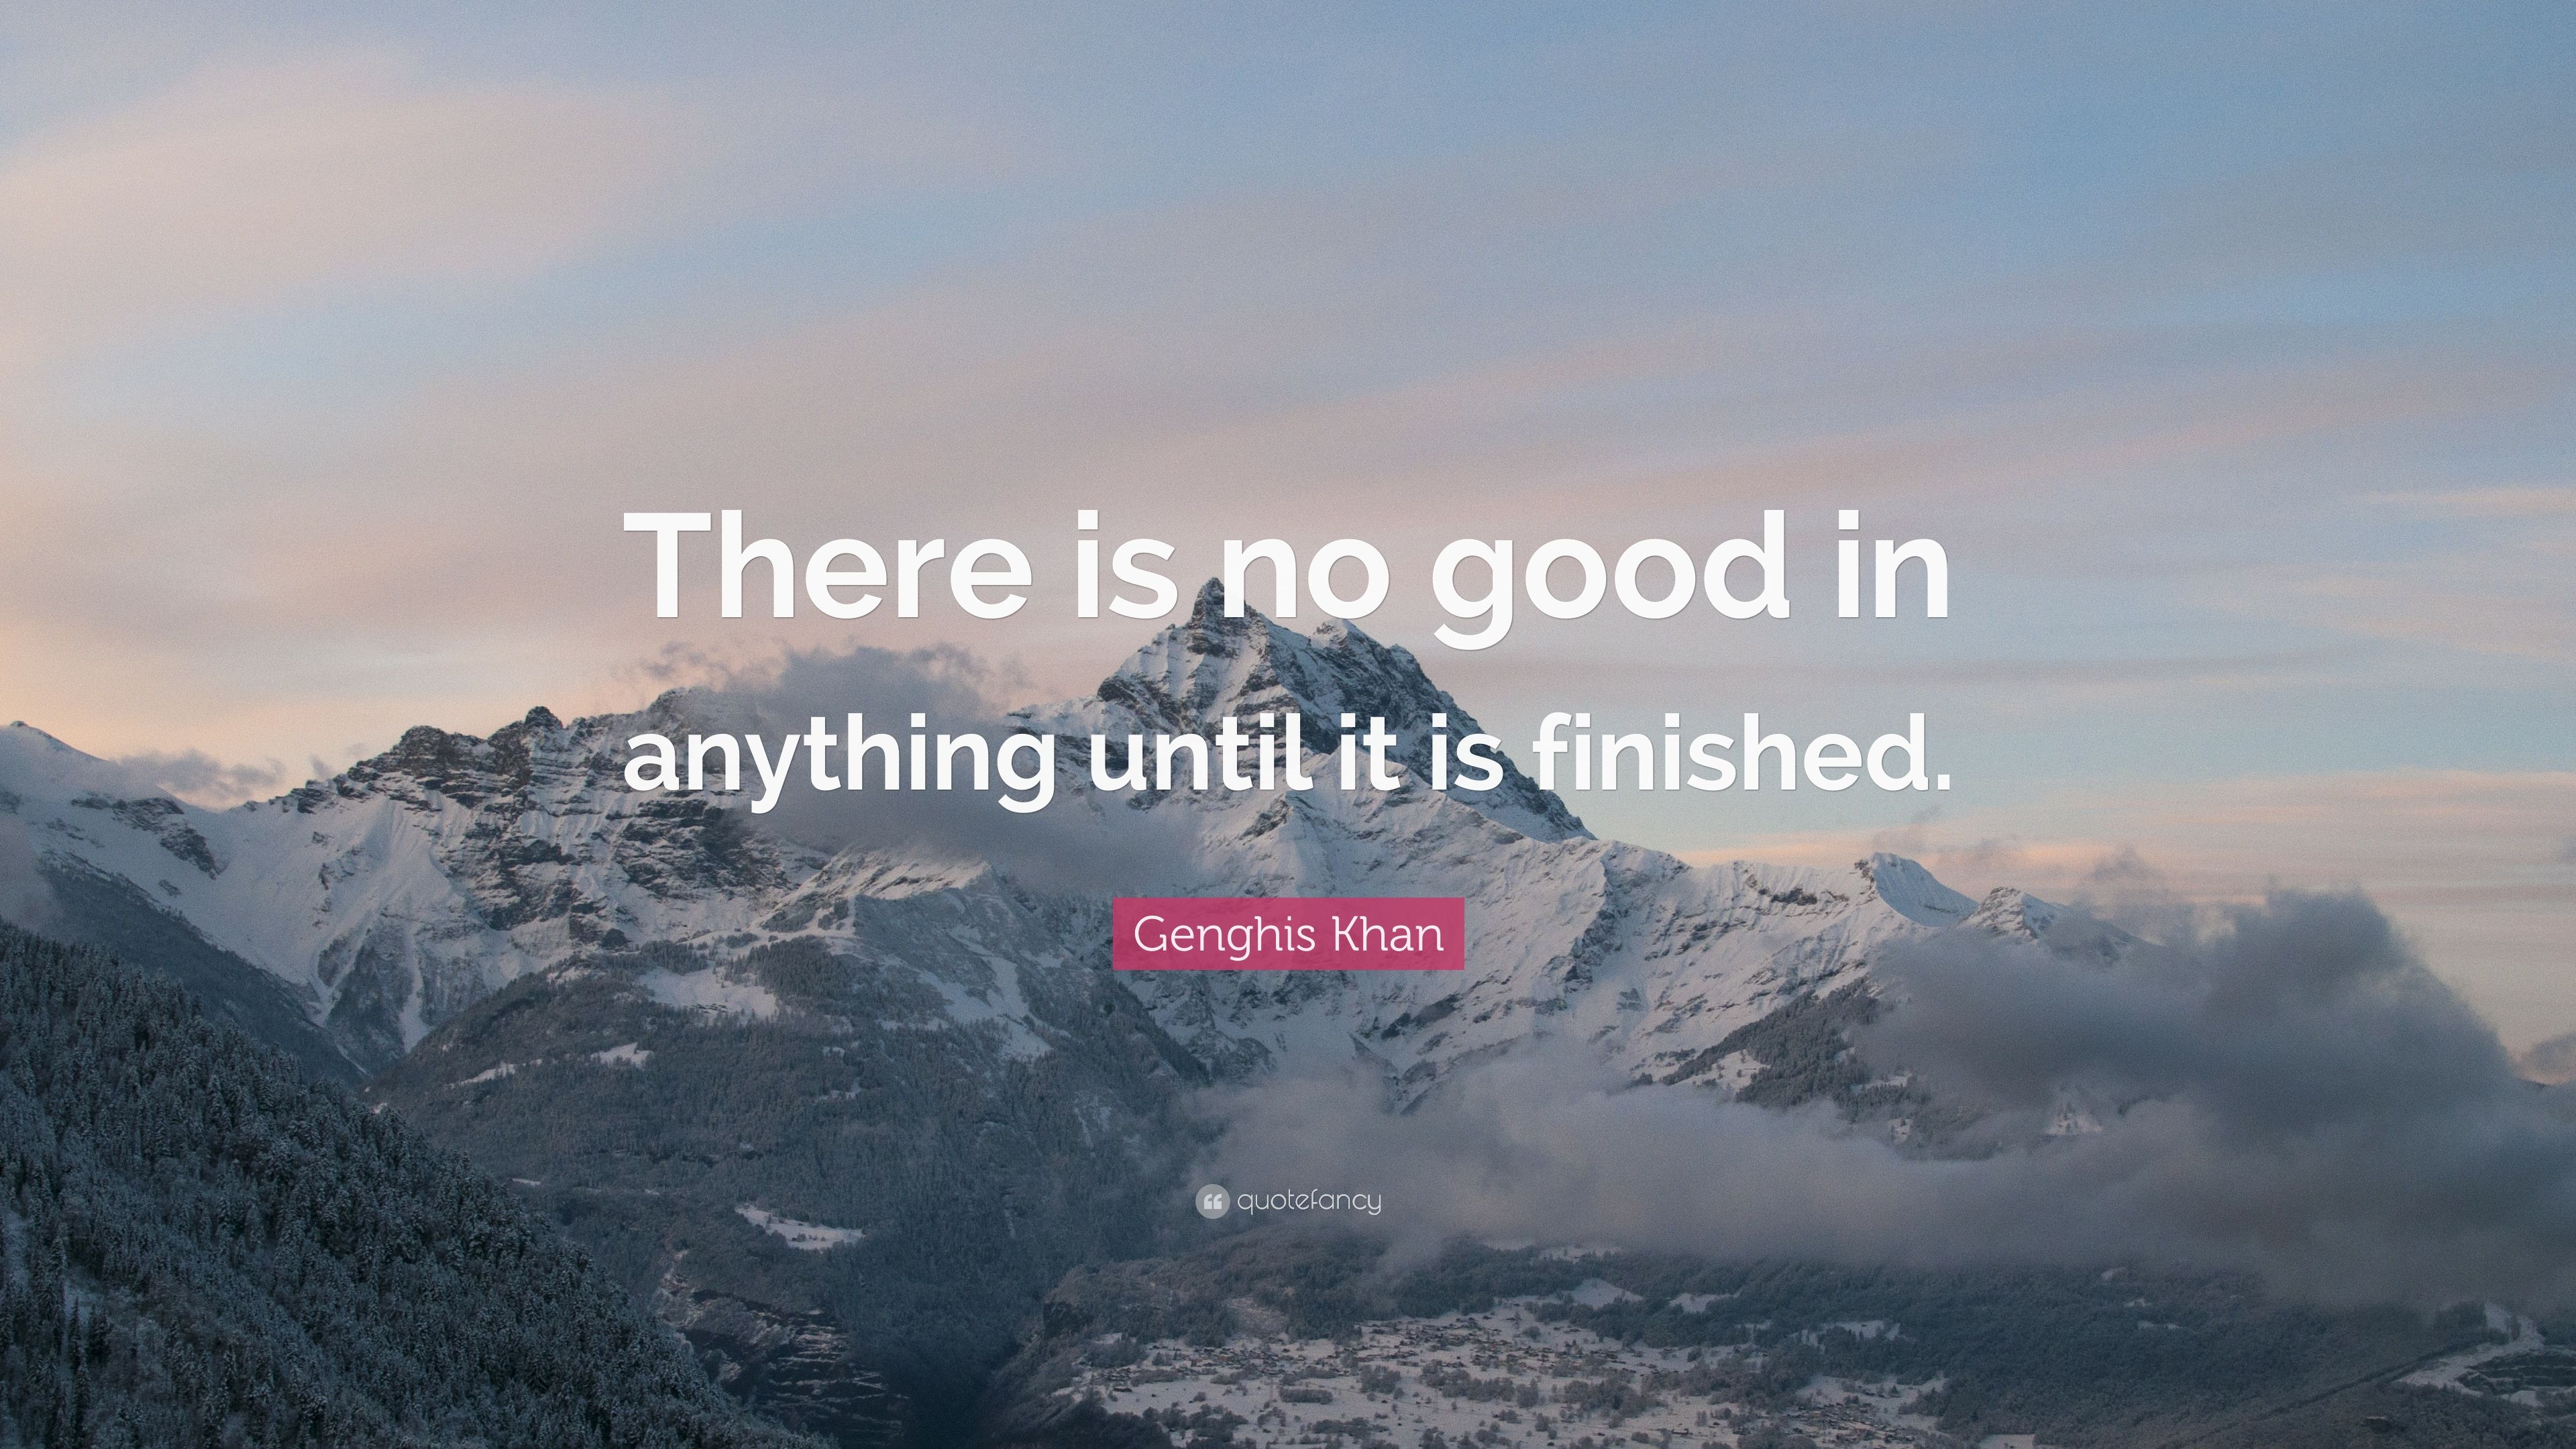 Genghis Khan Quote: “There is no good in anything until it is finished.” (20 wallpaper)